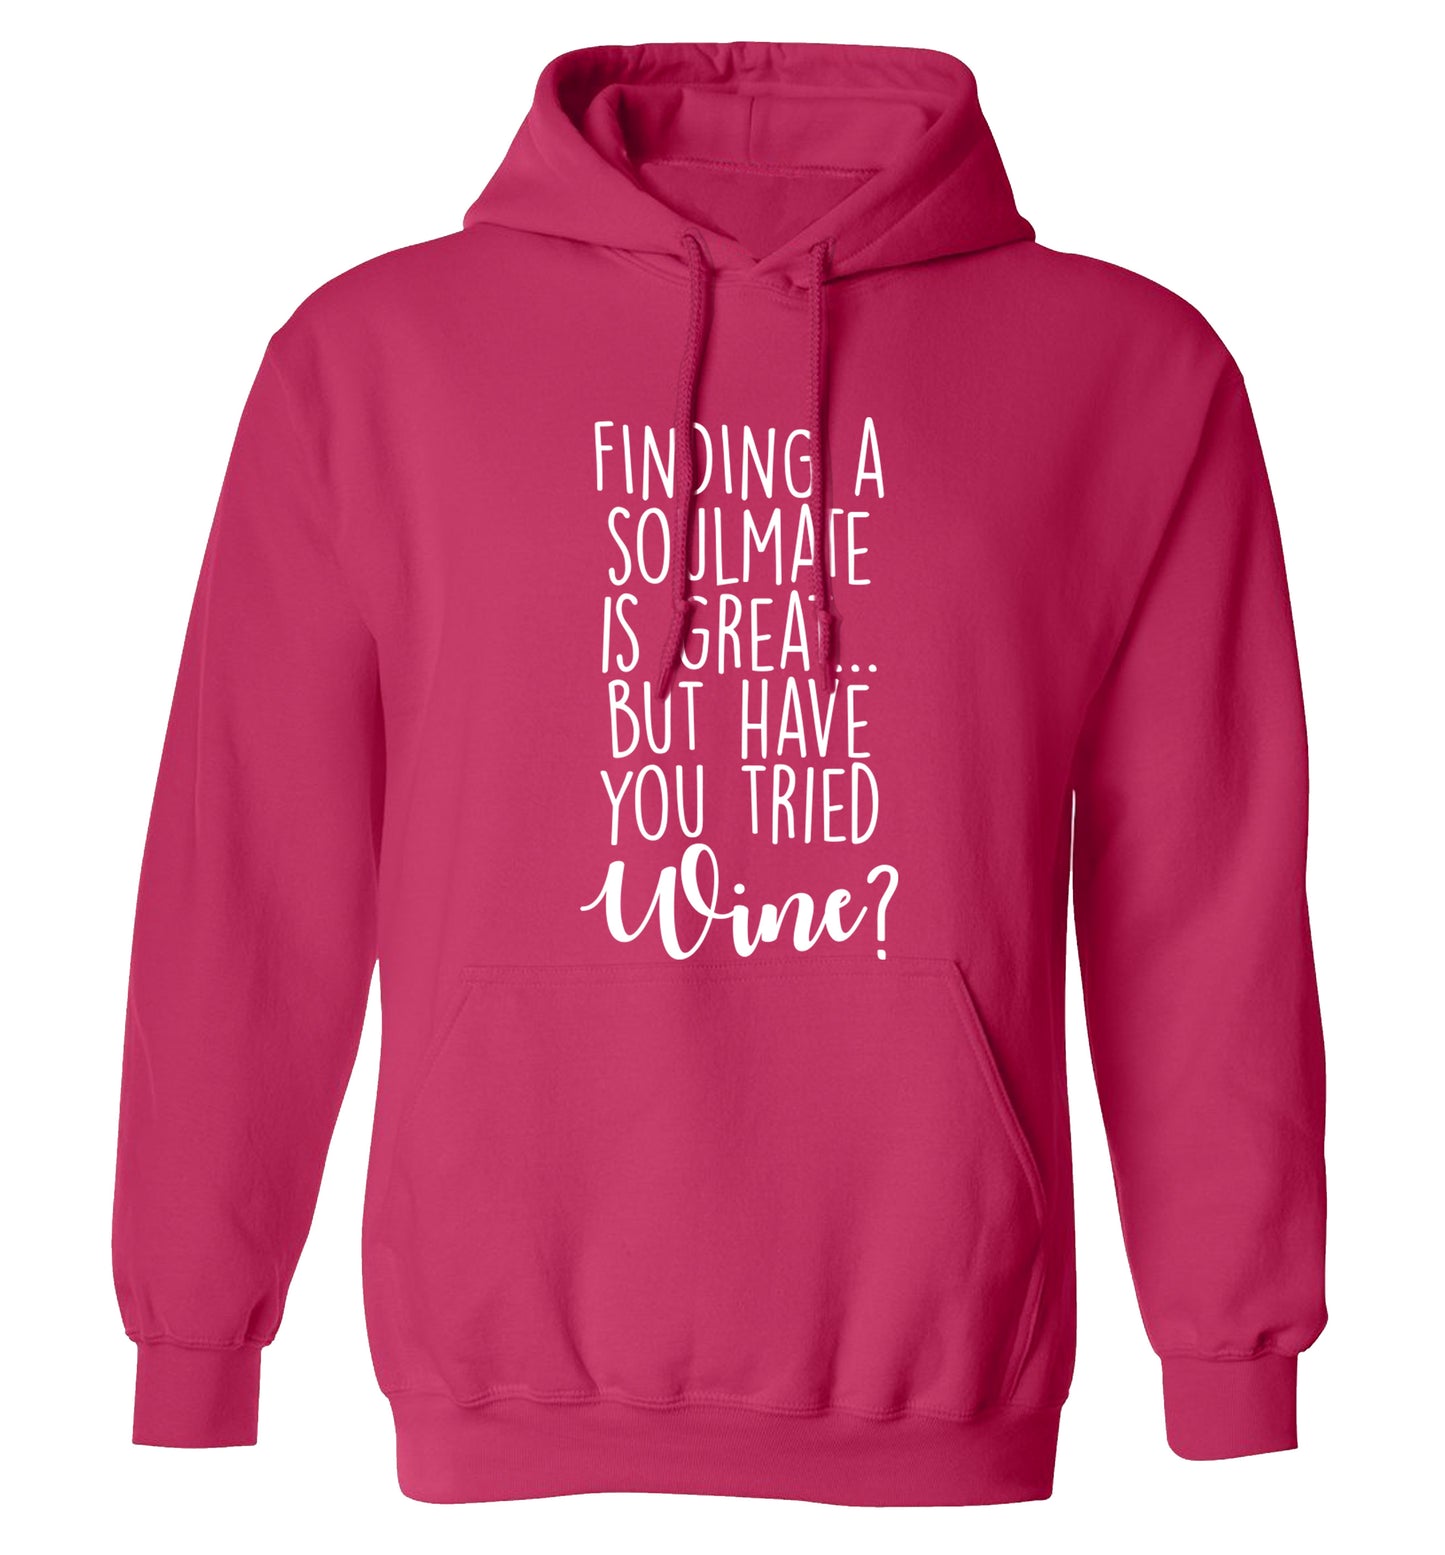 Finding a soulmate is great but have you tried wine? adults unisex pink hoodie 2XL